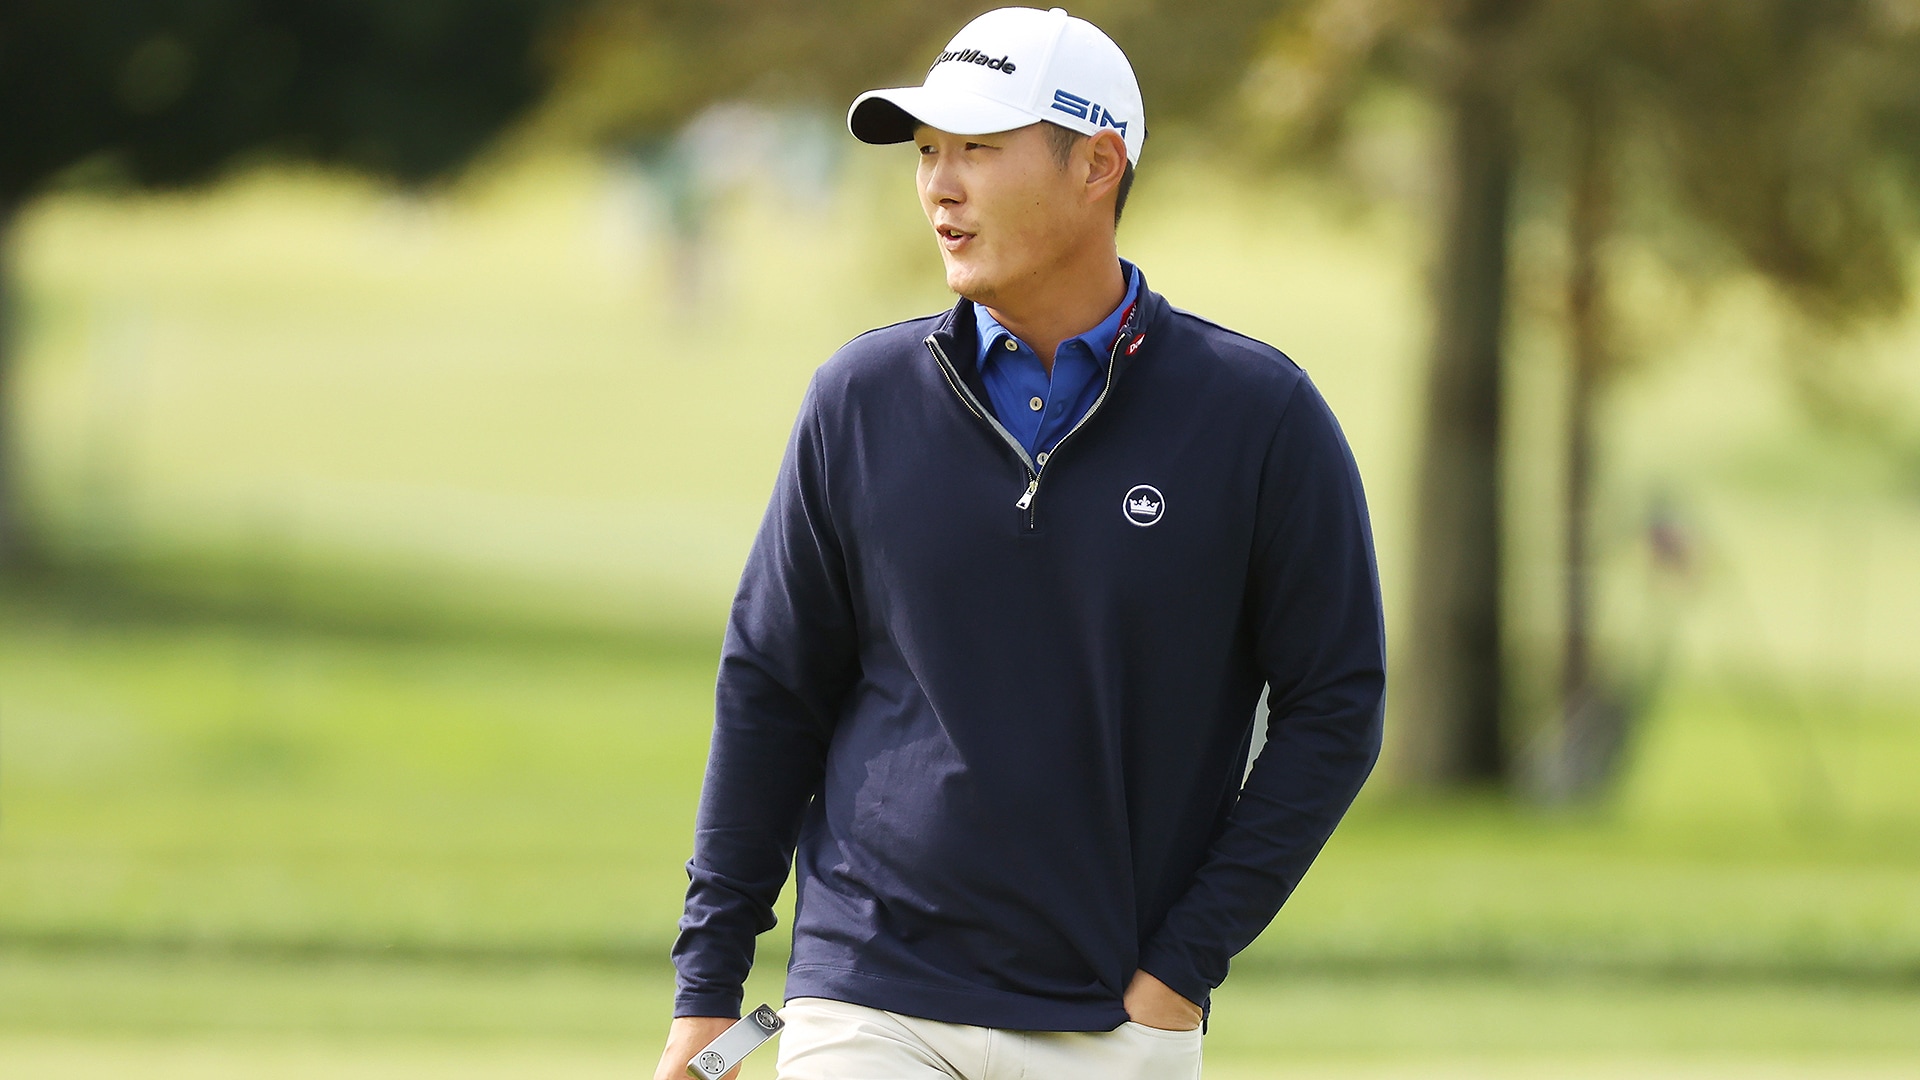 Danny Lee apologizes for ‘poor actions’ at U.S. Open